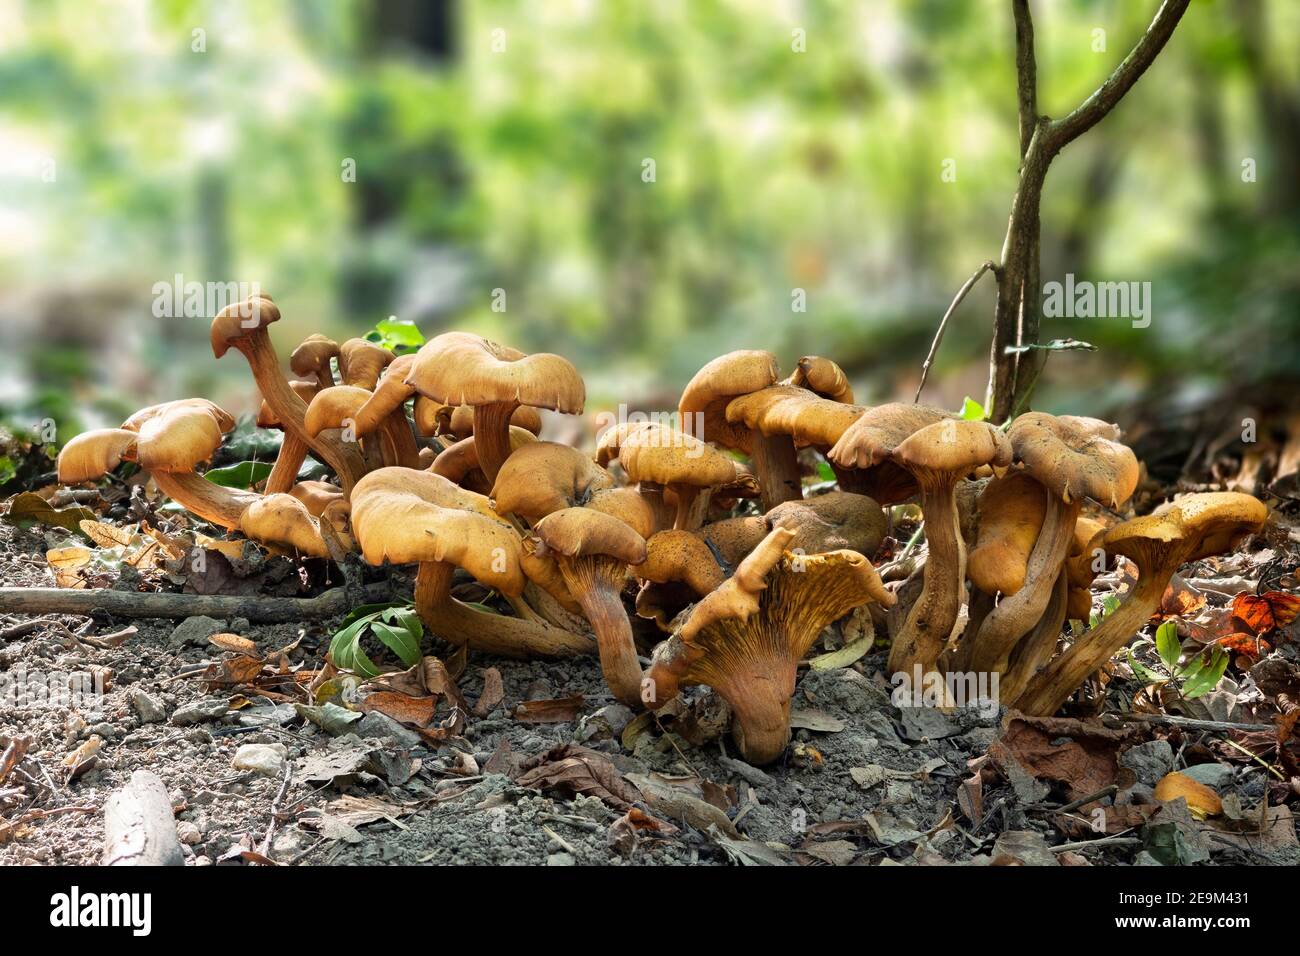 Omphalotus olearius, commonly known as the jack-o-lantern mushroom, is a poisonous orange gilled mushroom. , an intresting photo Stock Photo